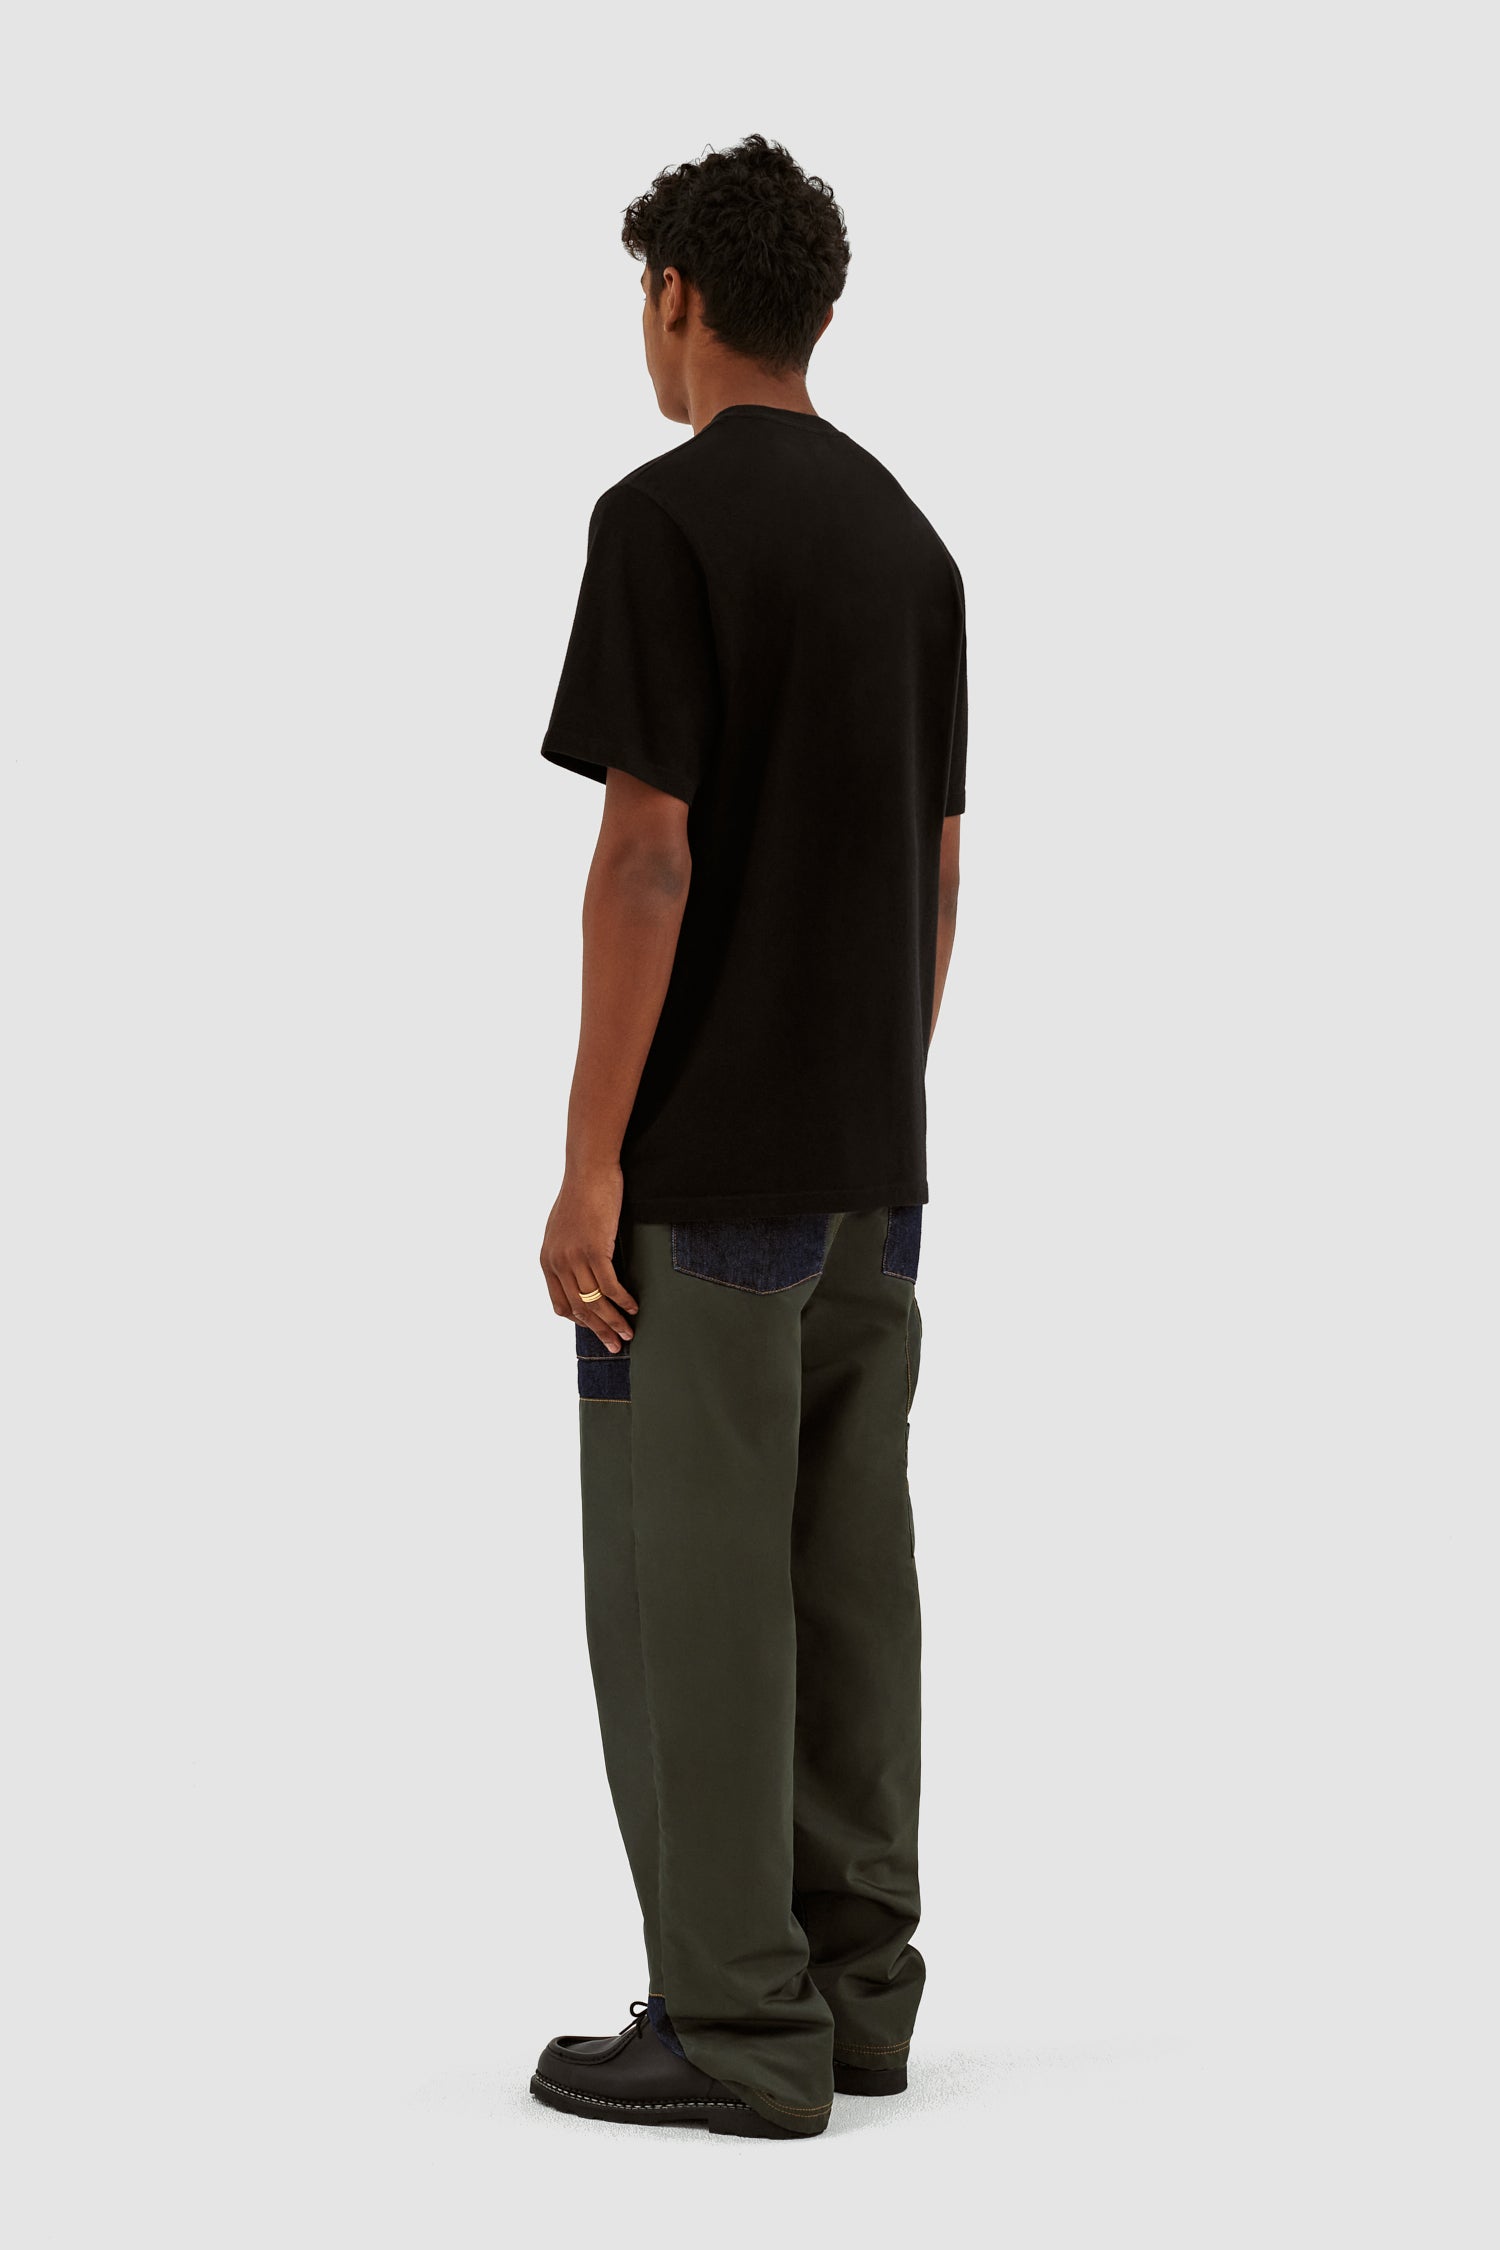 Black Sweater; White Shirt; Green Pants | Mens business casual outfits,  Business casual fall, Fashion business casual